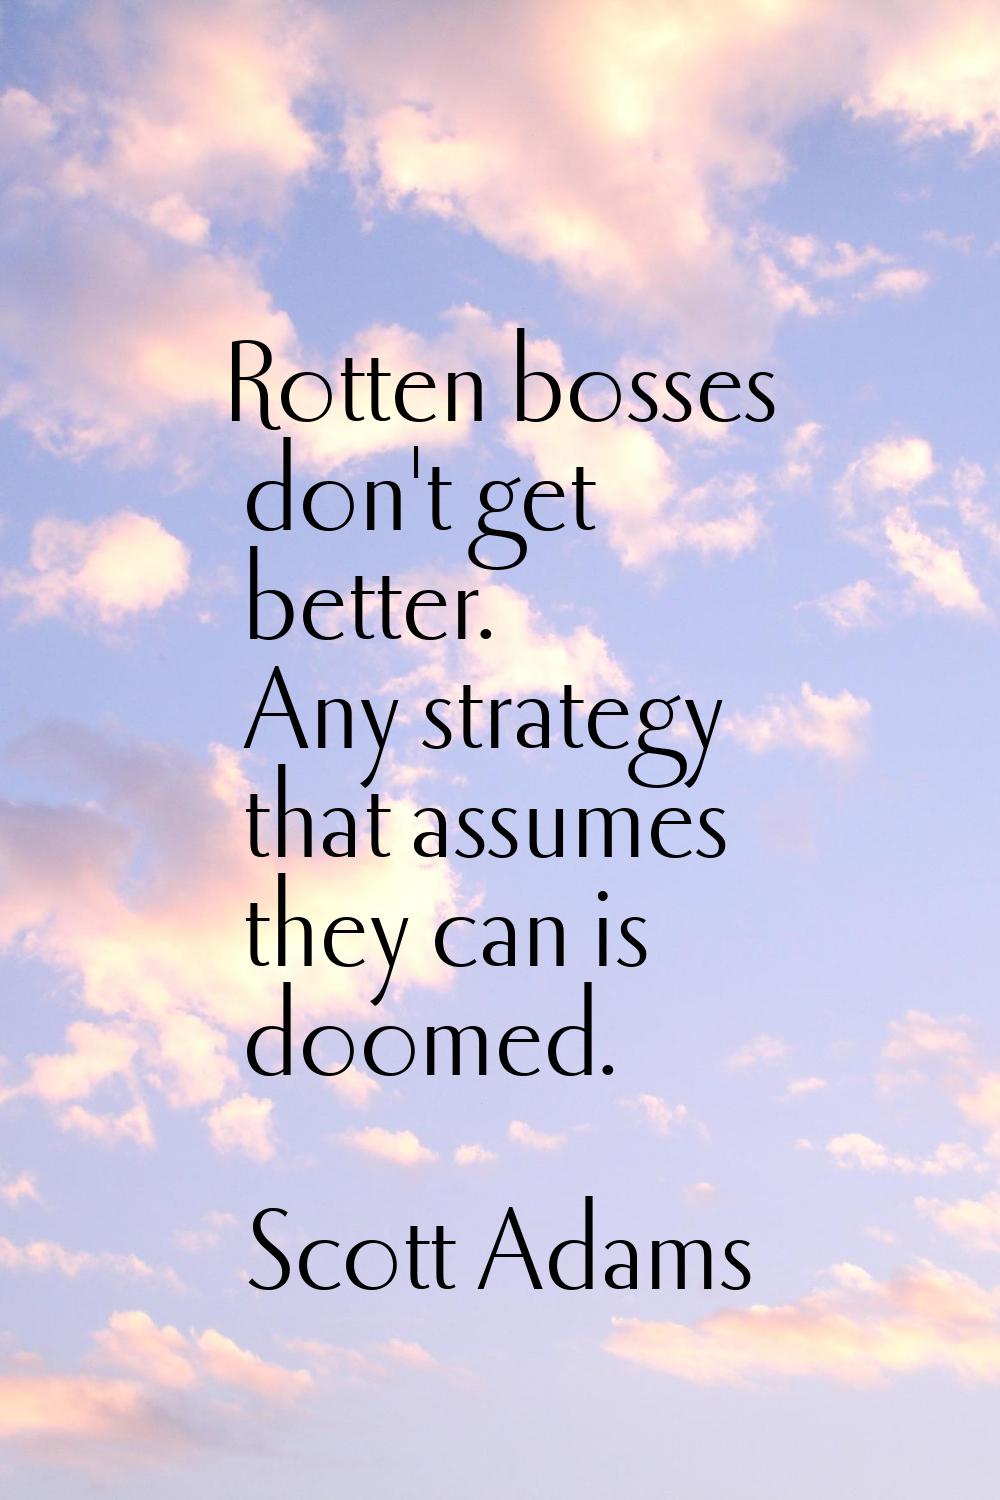 Rotten bosses don't get better. Any strategy that assumes they can is doomed.